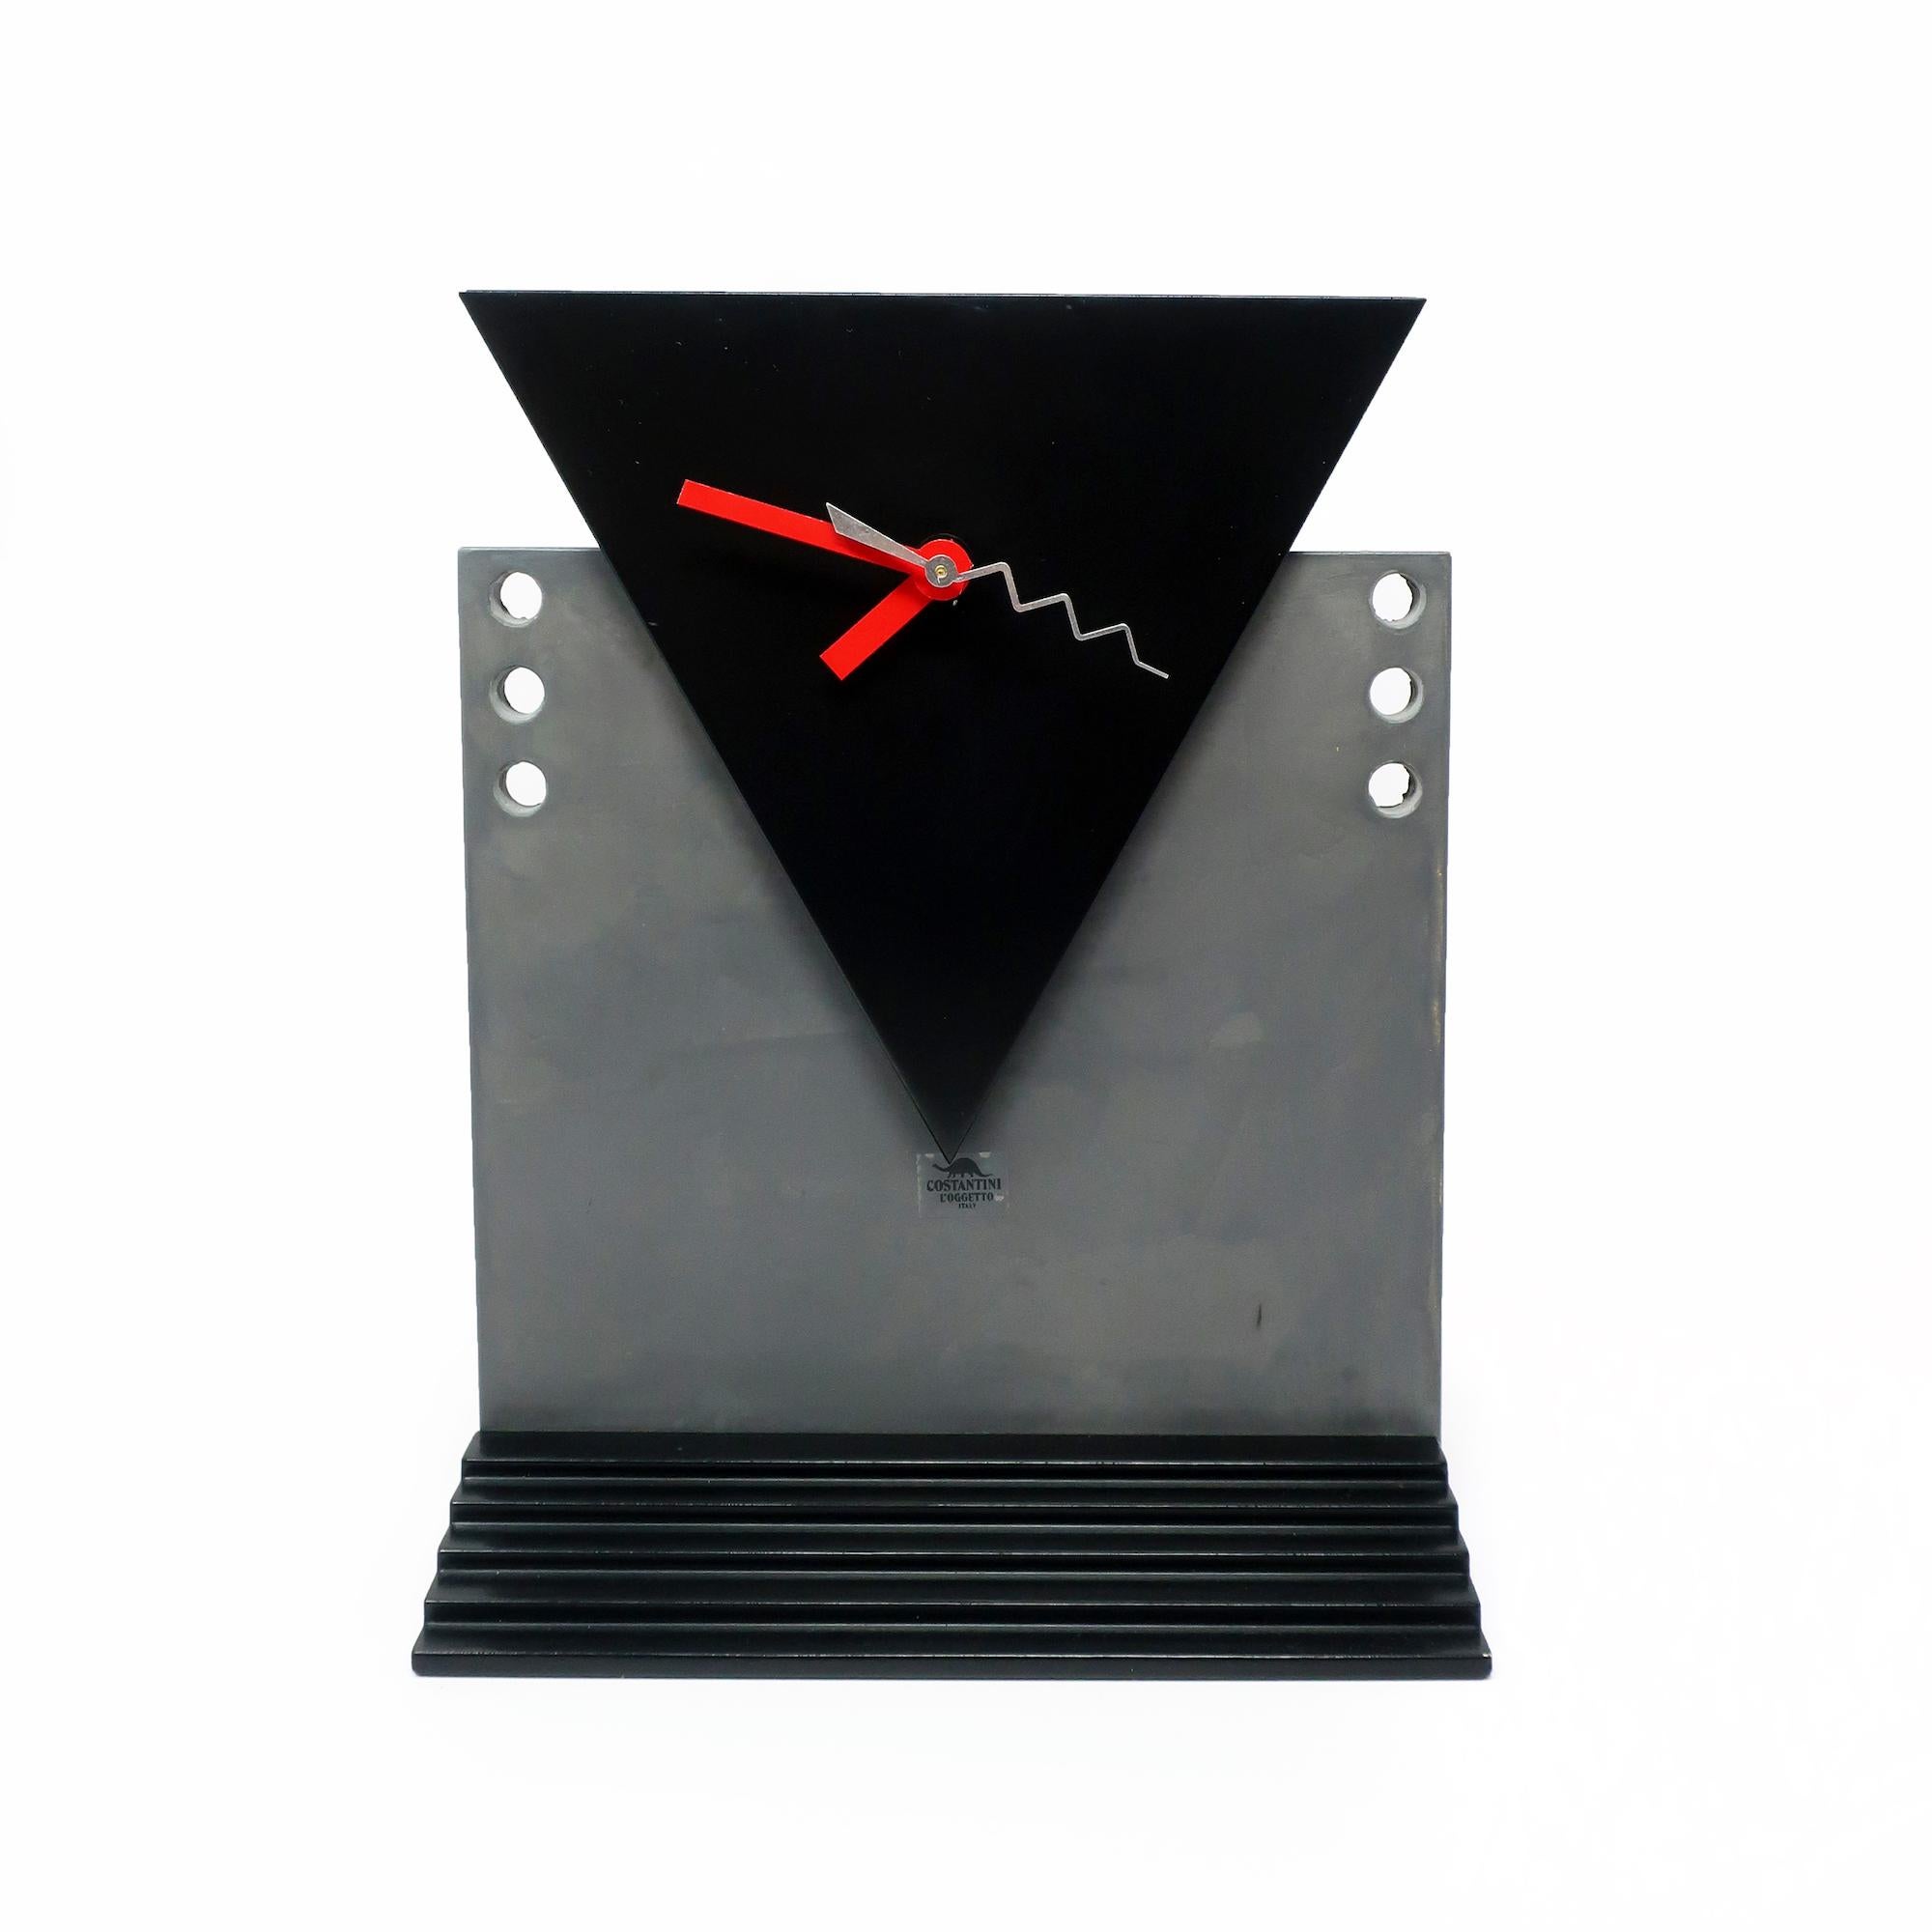 Manufactured by Costantini l’Ogetto in Italy during the 1980s and likely designed by Pietro d’Amato, this table or mantle clock has a glossy black stepped base, matte gray body, matte black face, and red and silver hands. The clock has a new